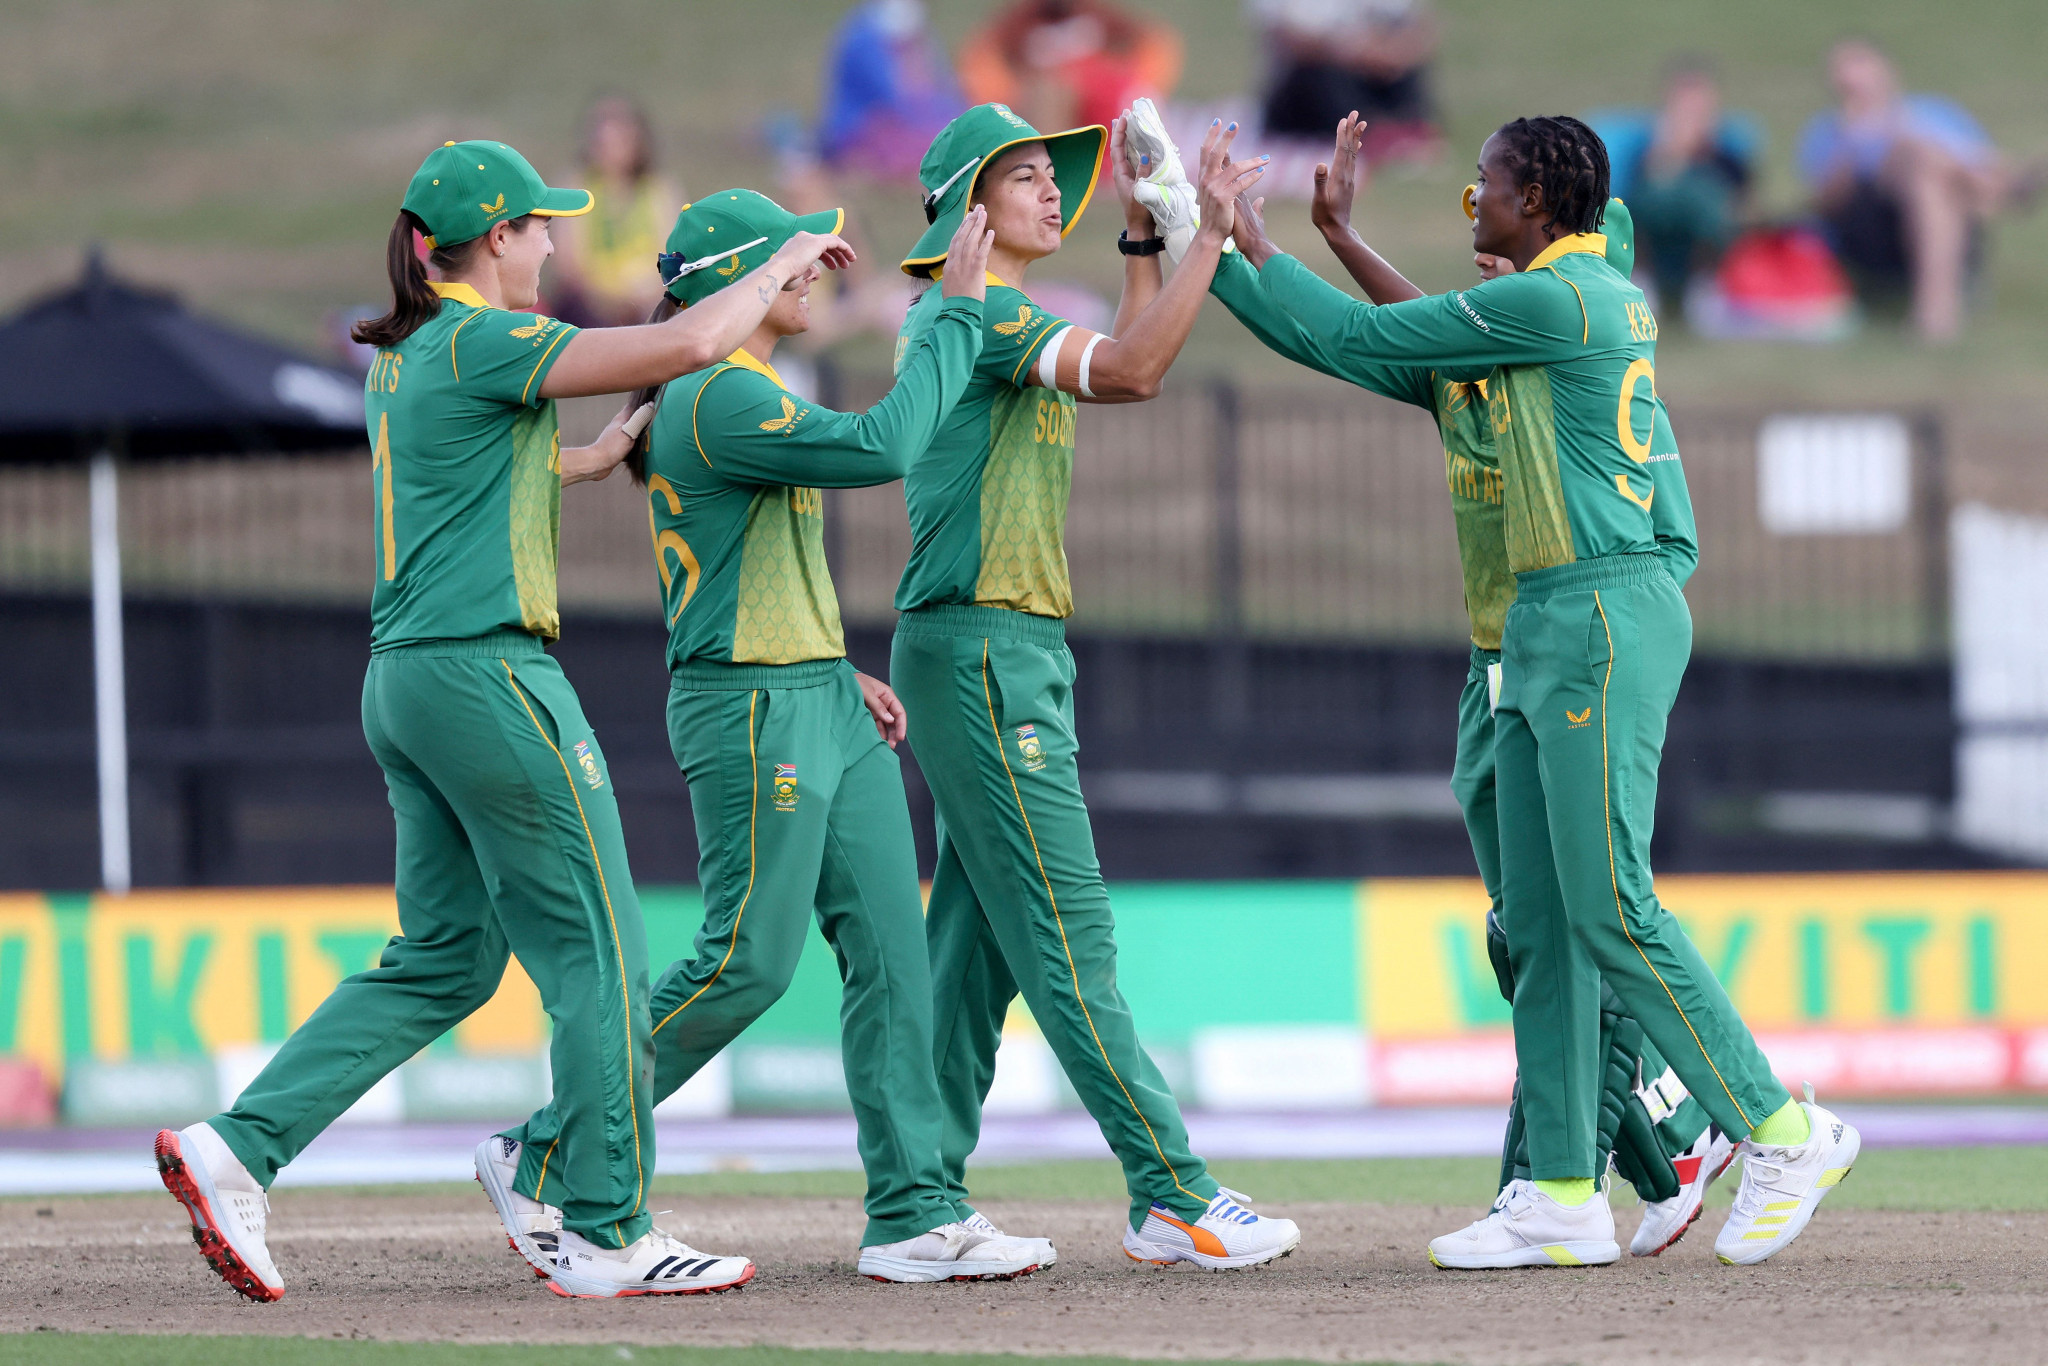 South Africa's victory over New Zealand was their fourth at this World Cup ©Getty Images